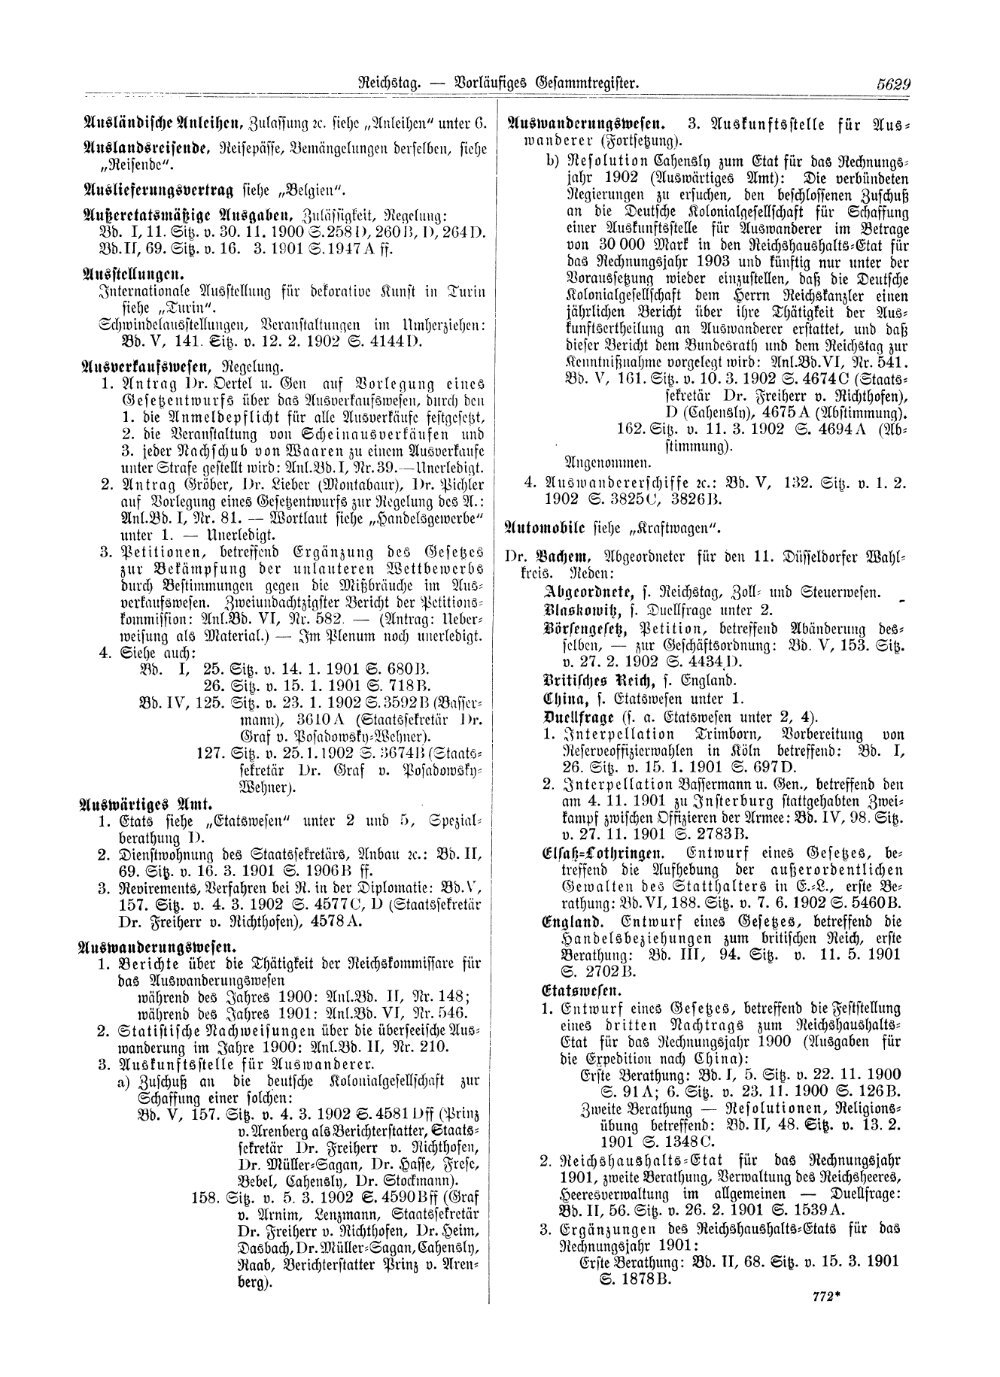 Scan of page 5629